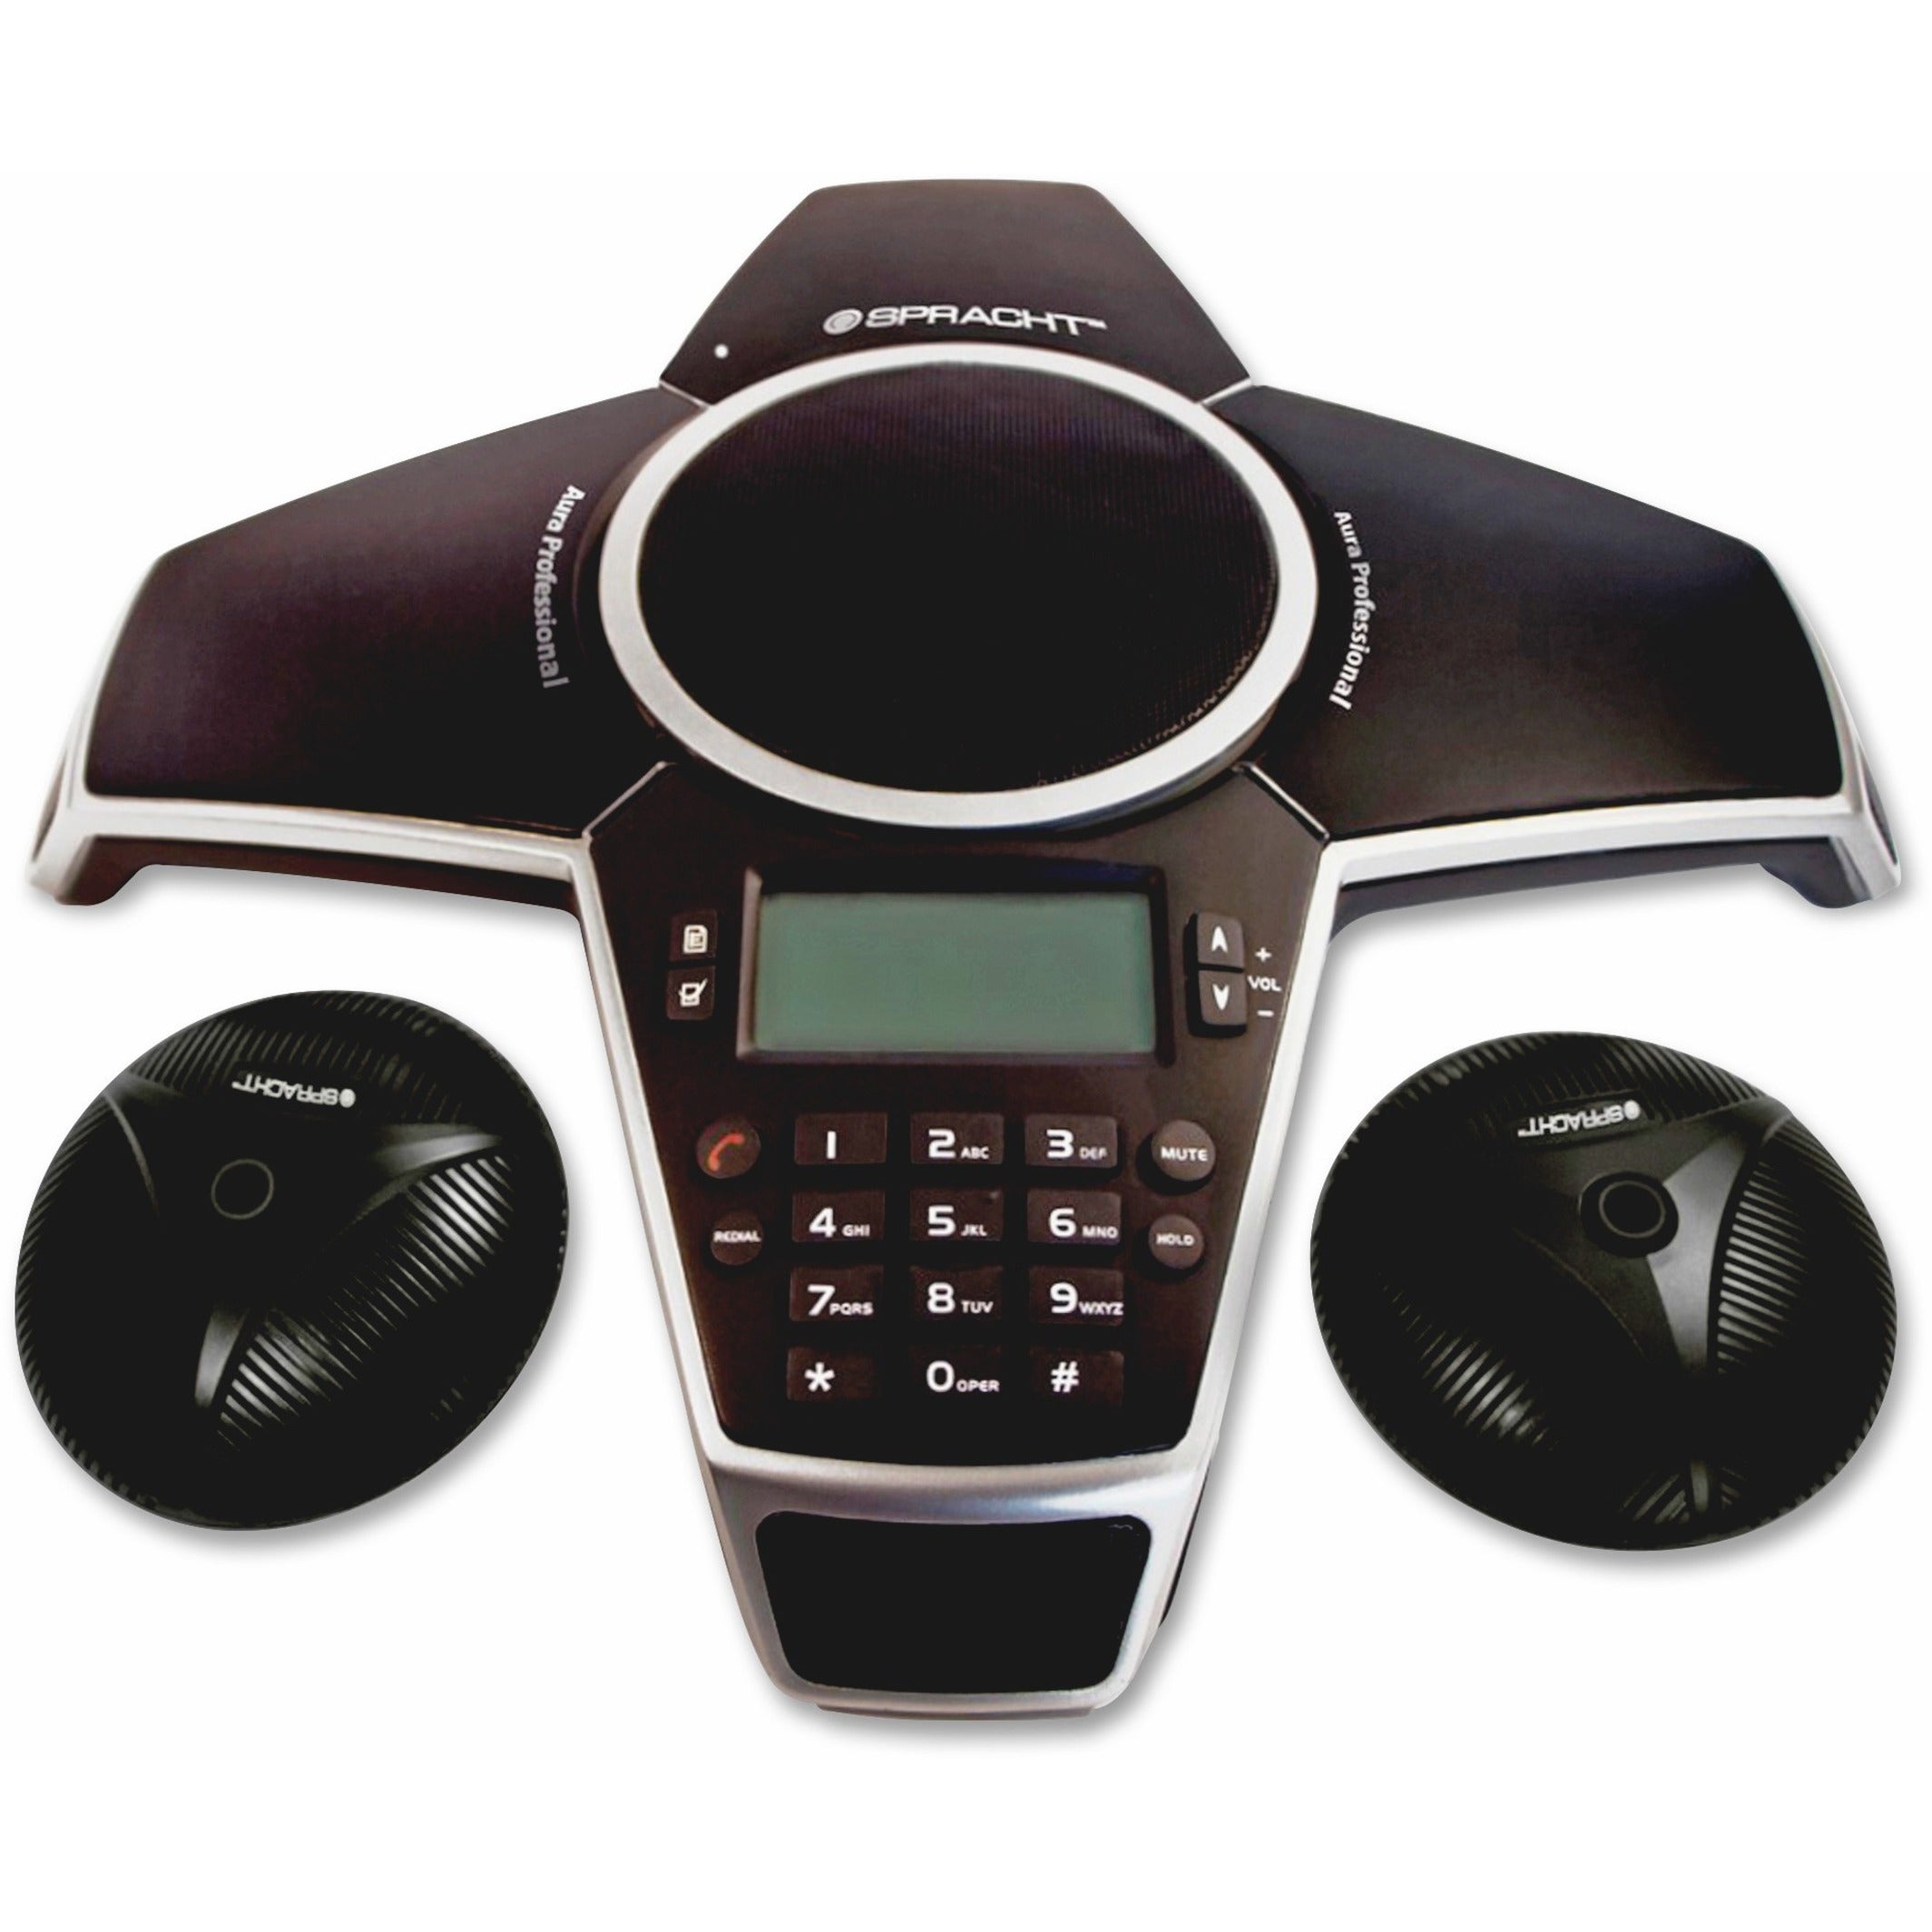 Spracht CP-3010 Aura Professional Conference Phone, High-Quality Speakerphone for Clear Communication